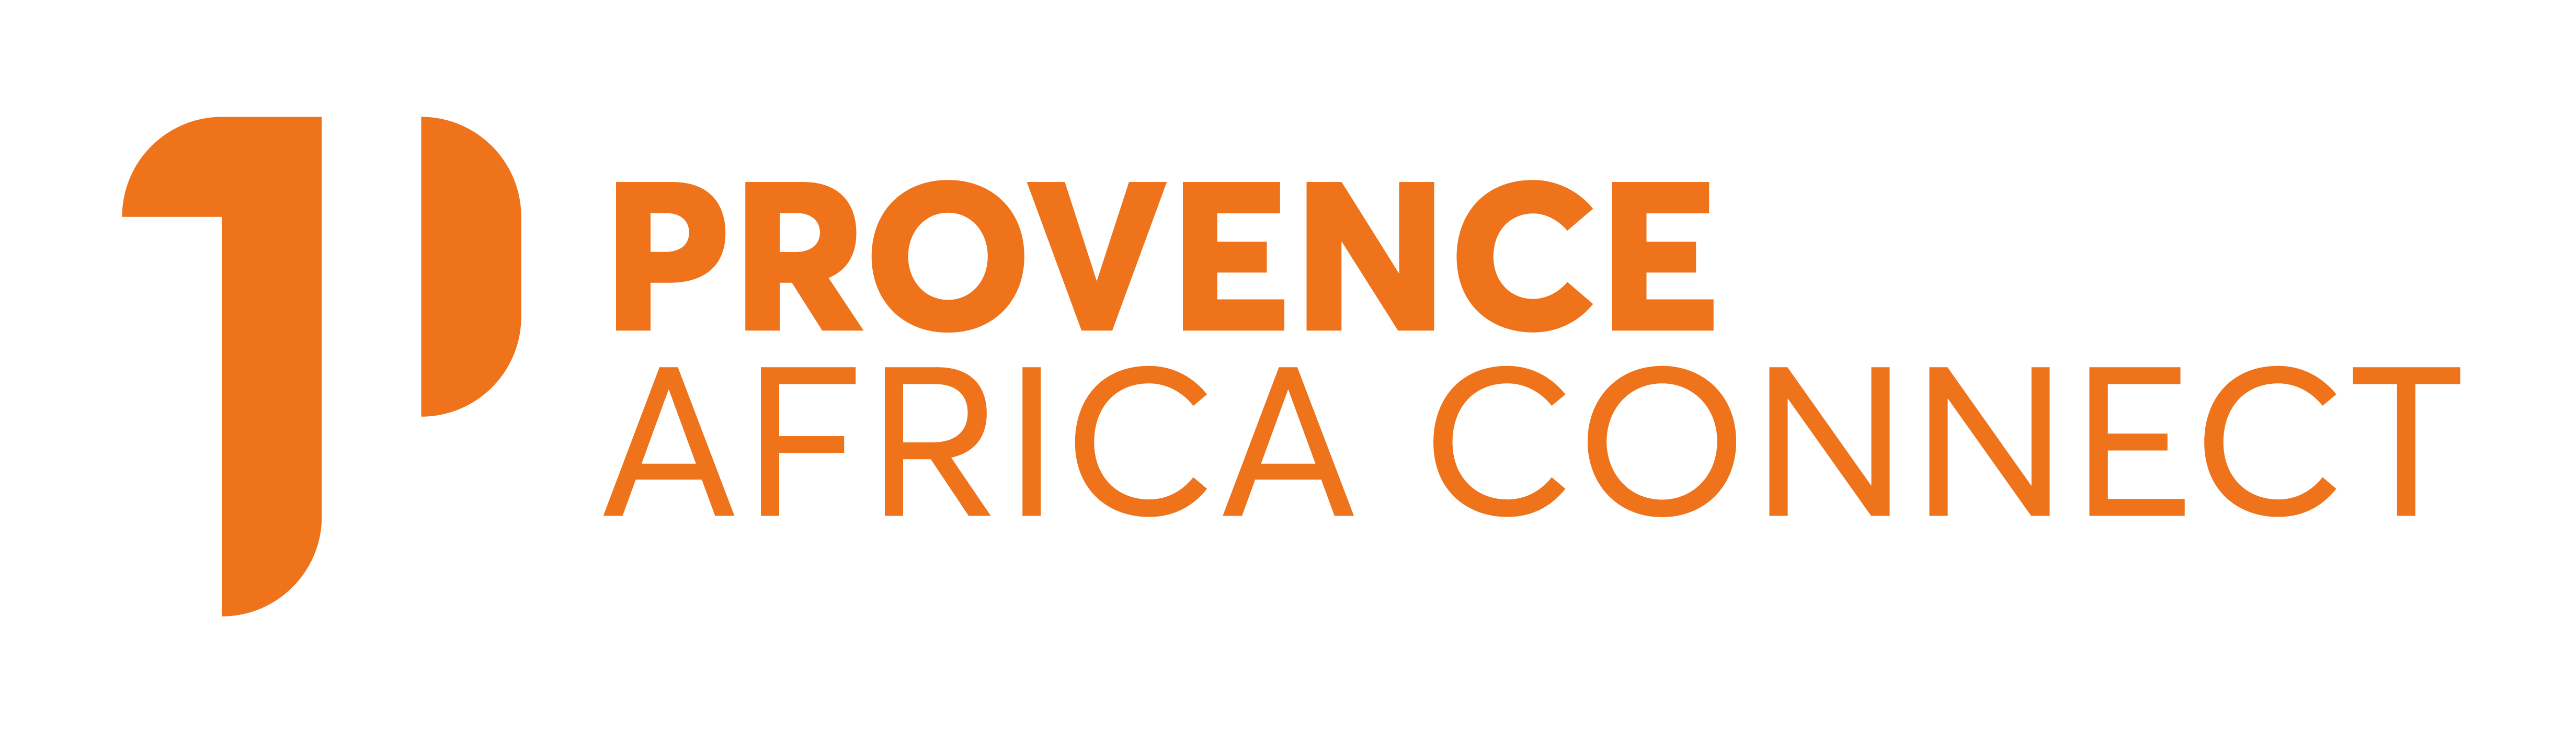 Provence Africa connect